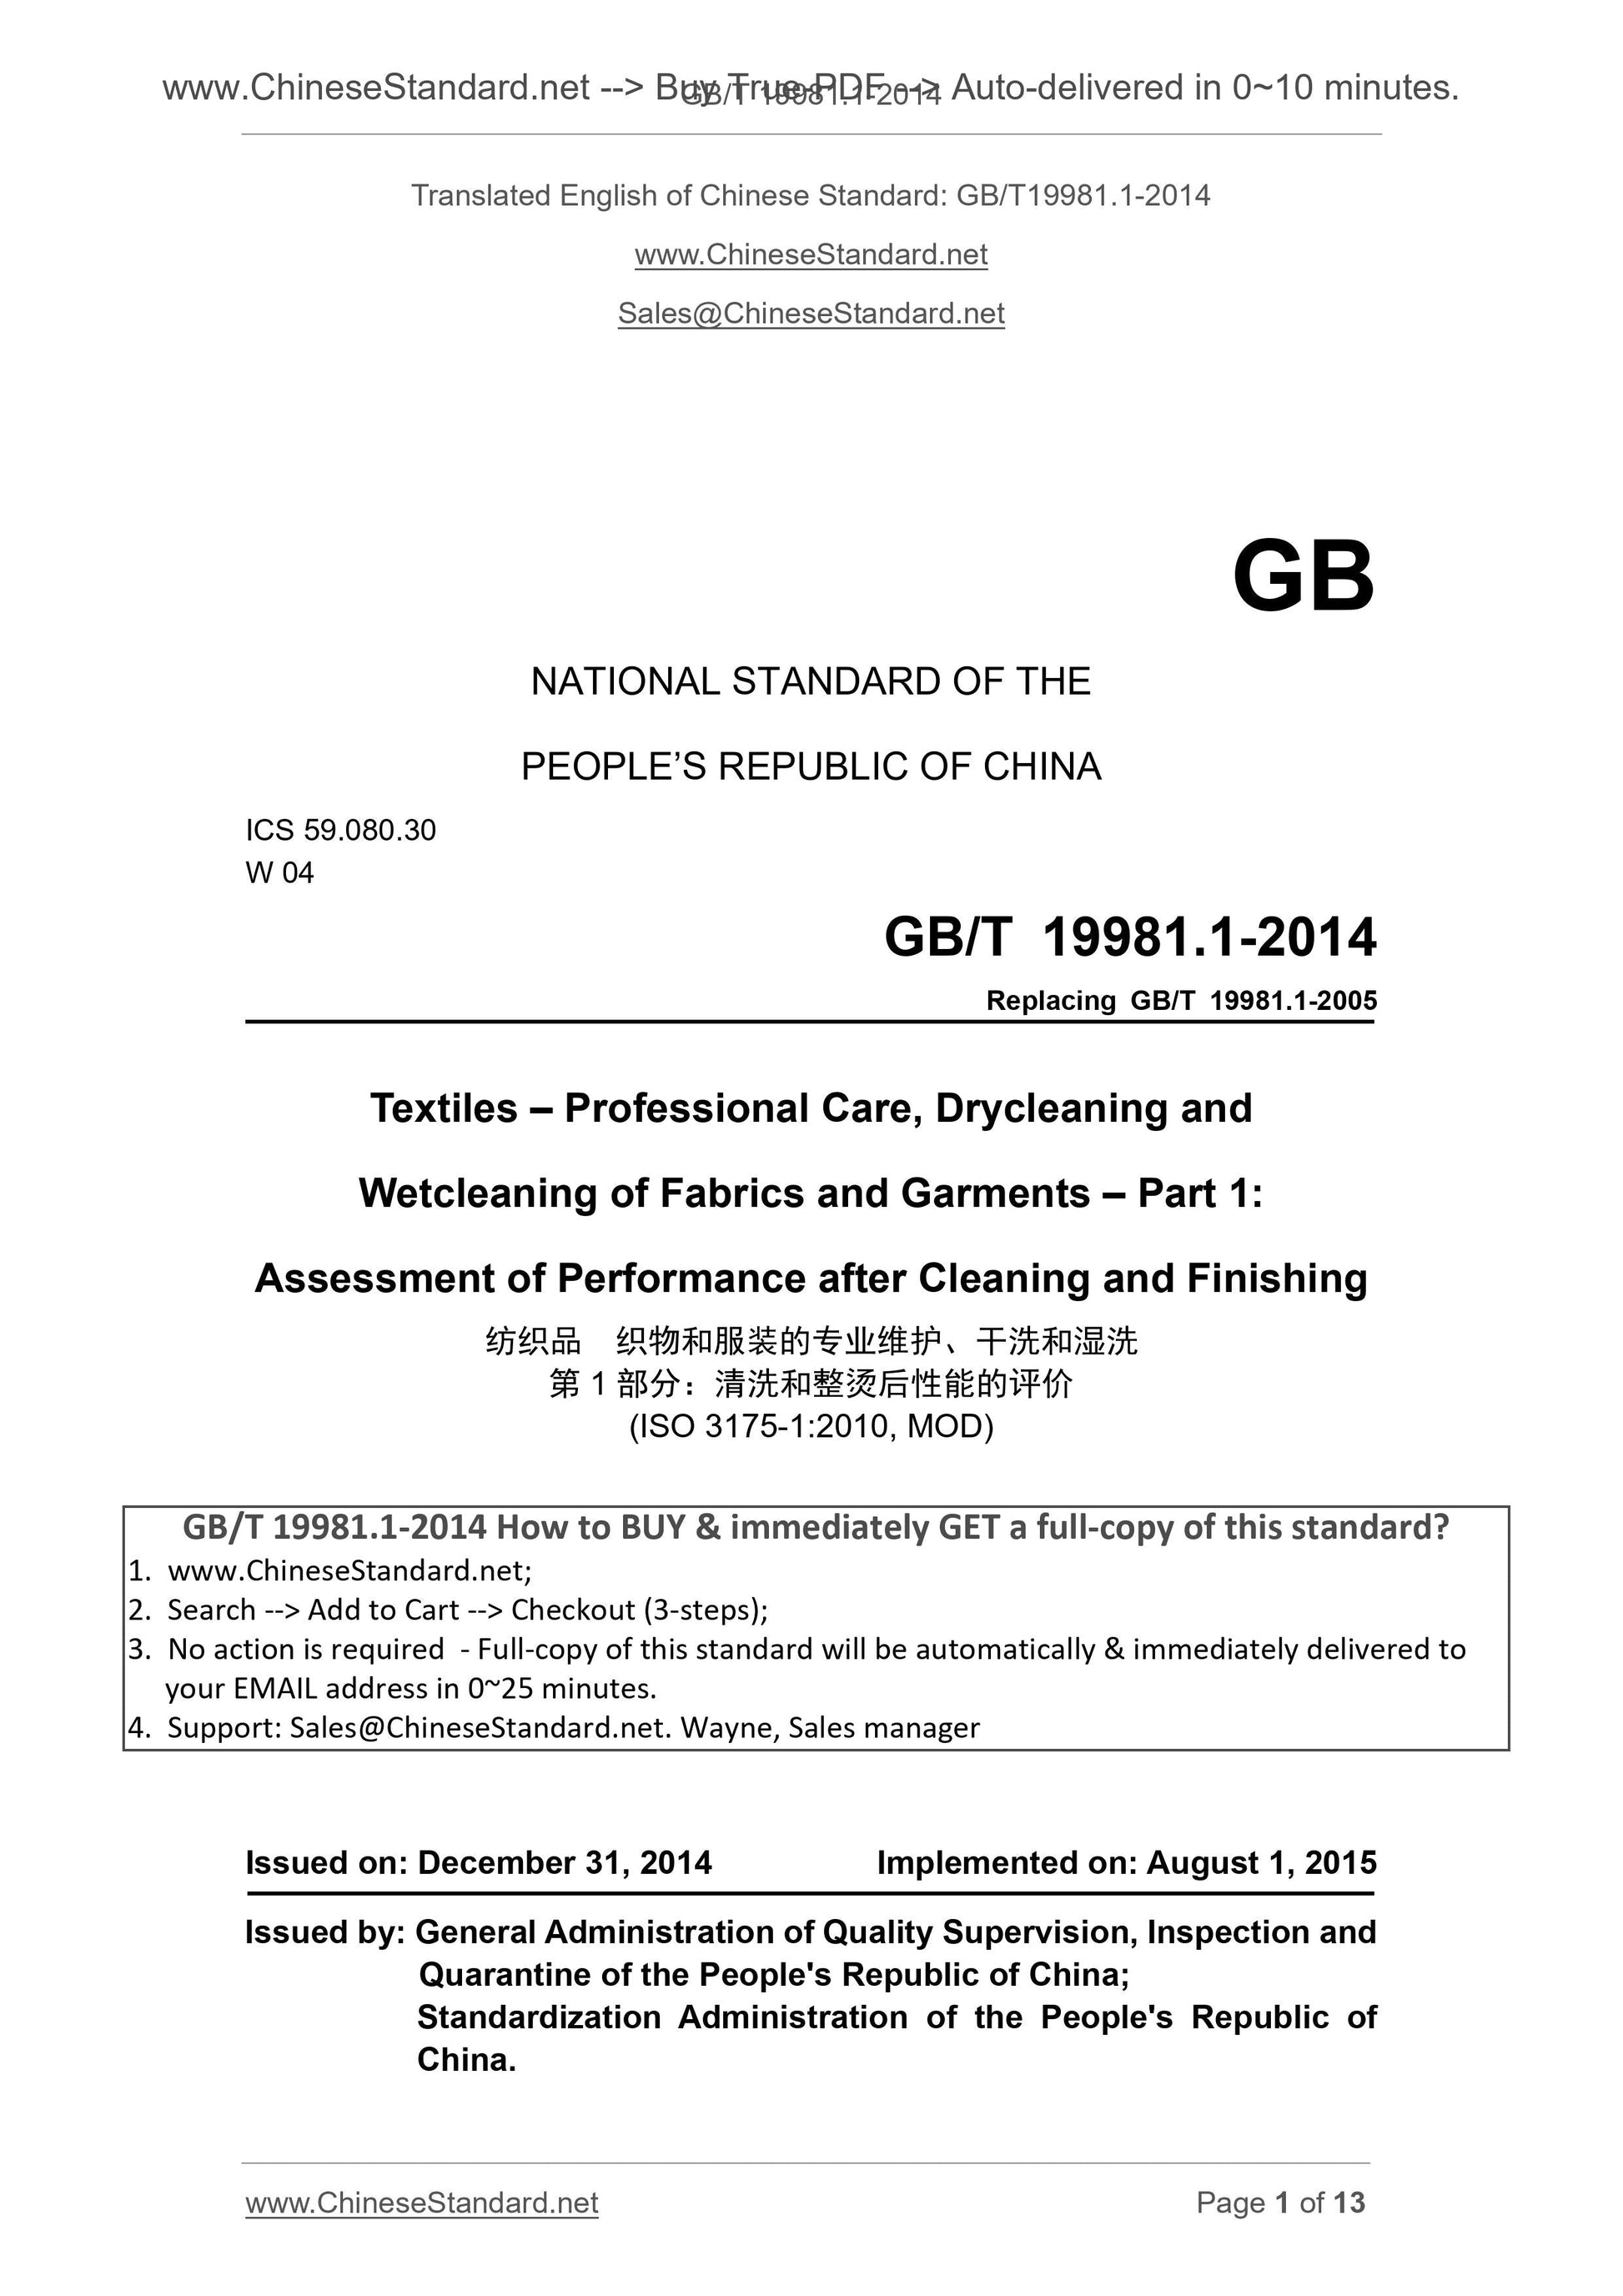 GB/T 19981.1-2014 Page 1